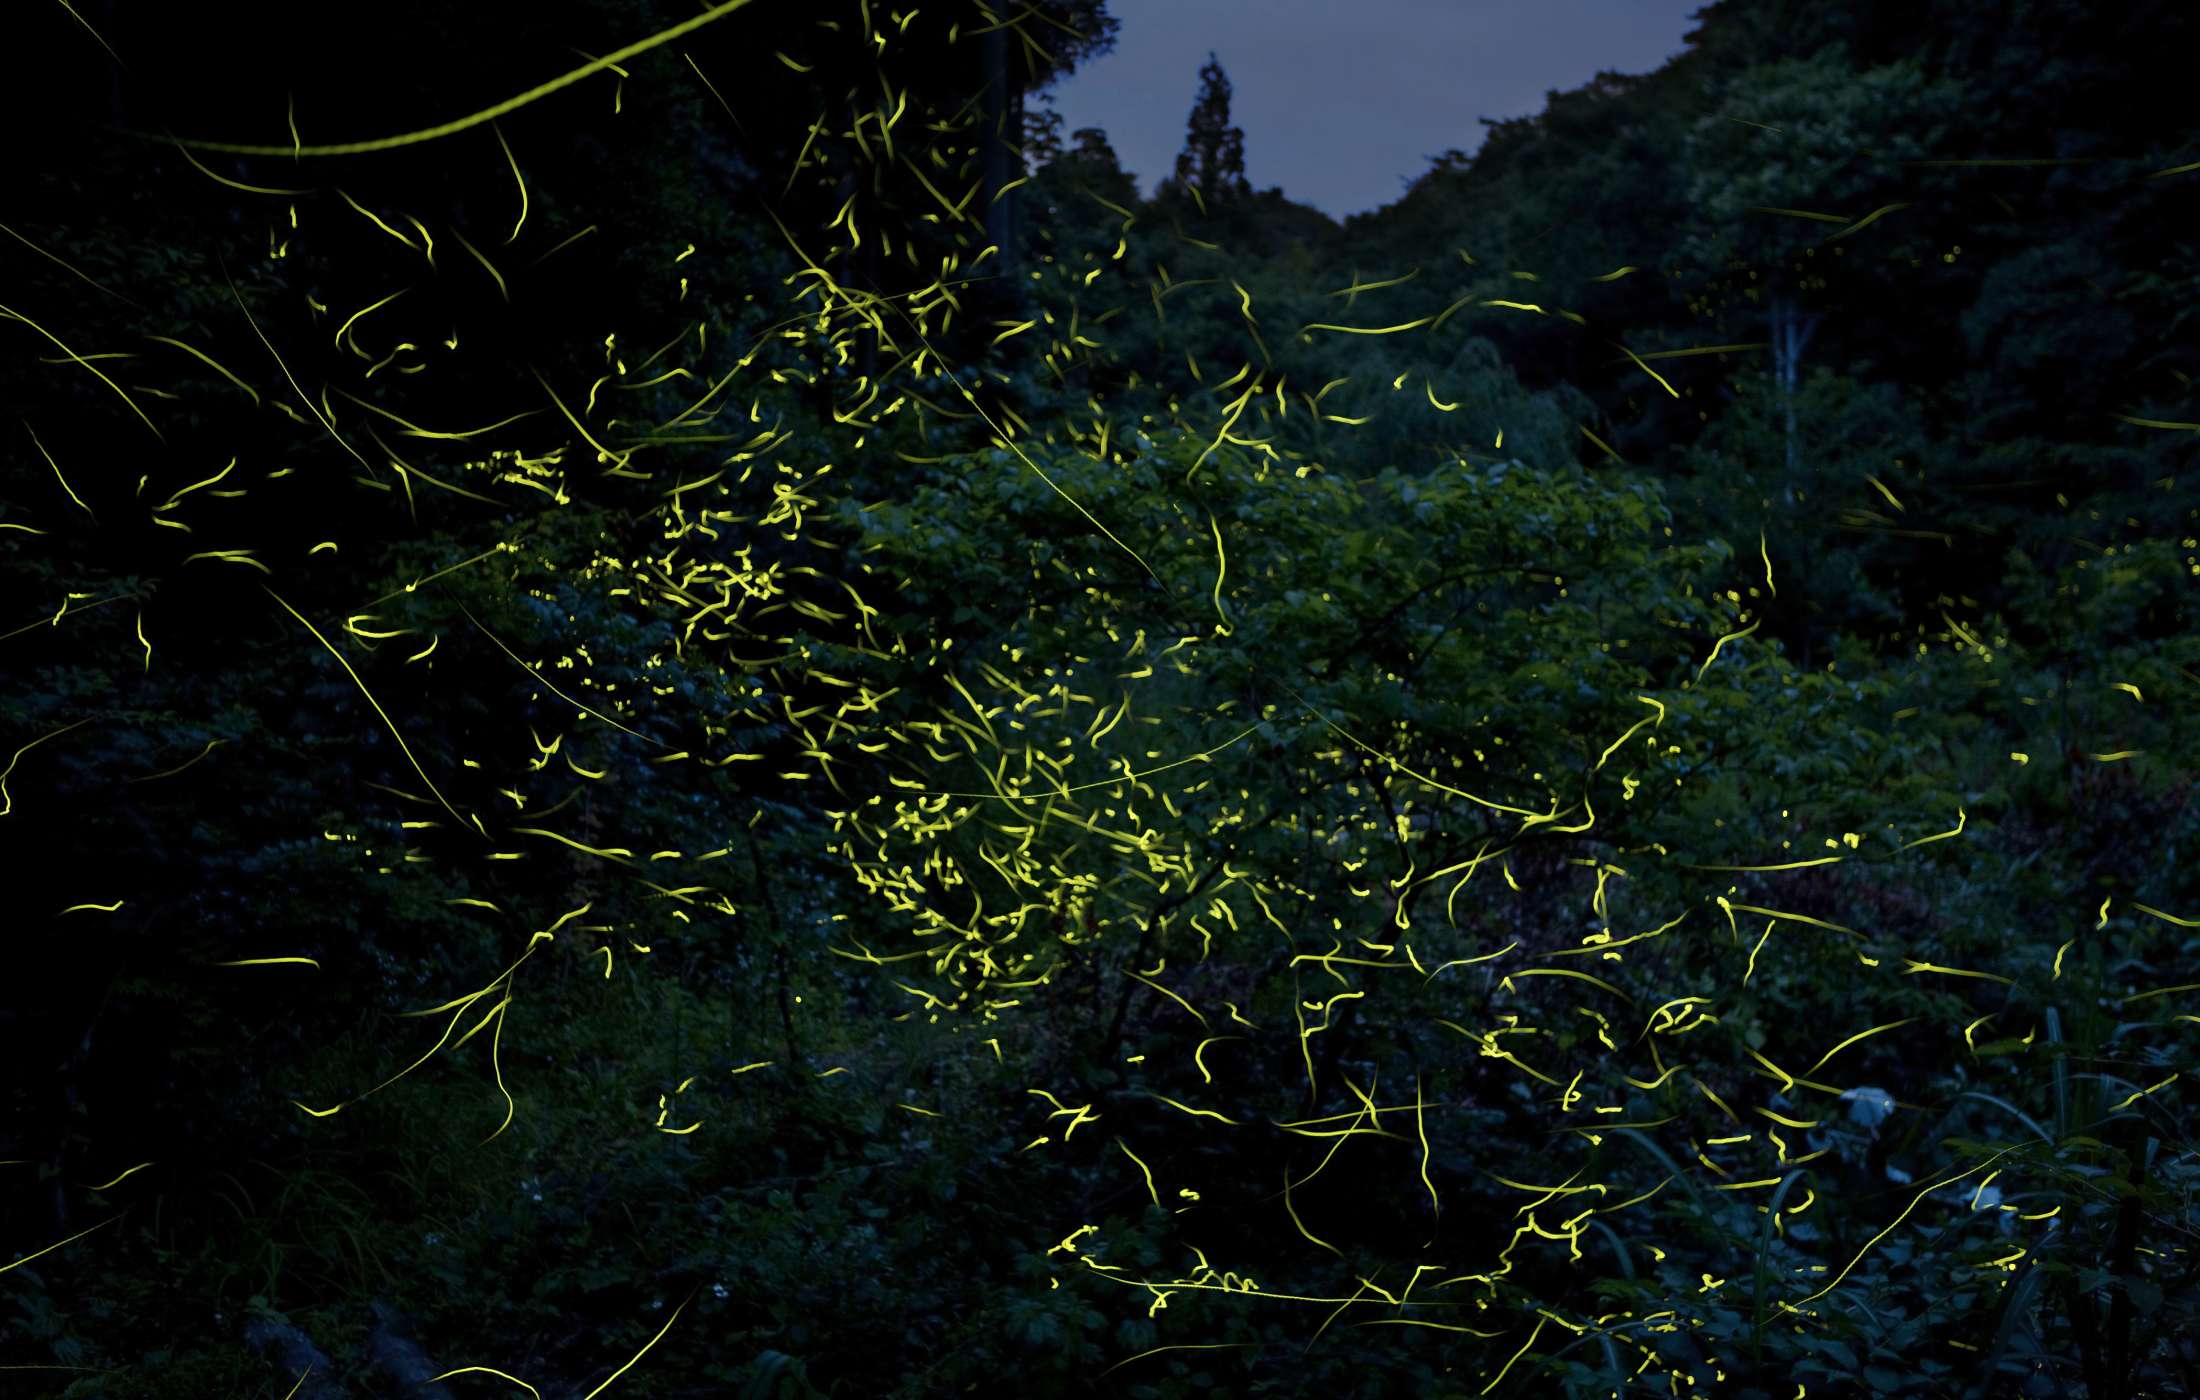 On the Glow: 9 Firefly Viewing Spots in Japan, Blog